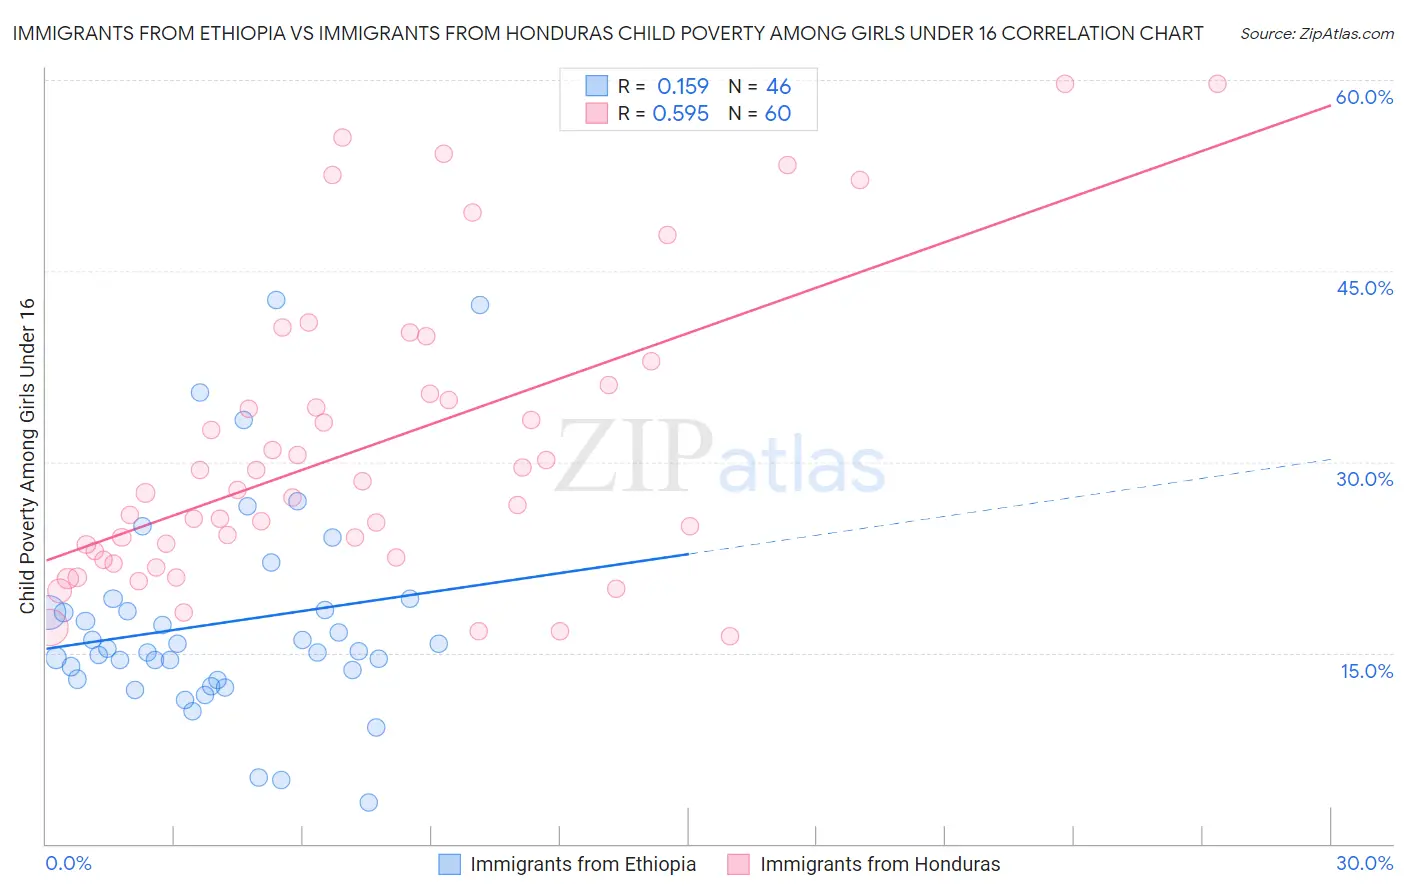 Immigrants from Ethiopia vs Immigrants from Honduras Child Poverty Among Girls Under 16